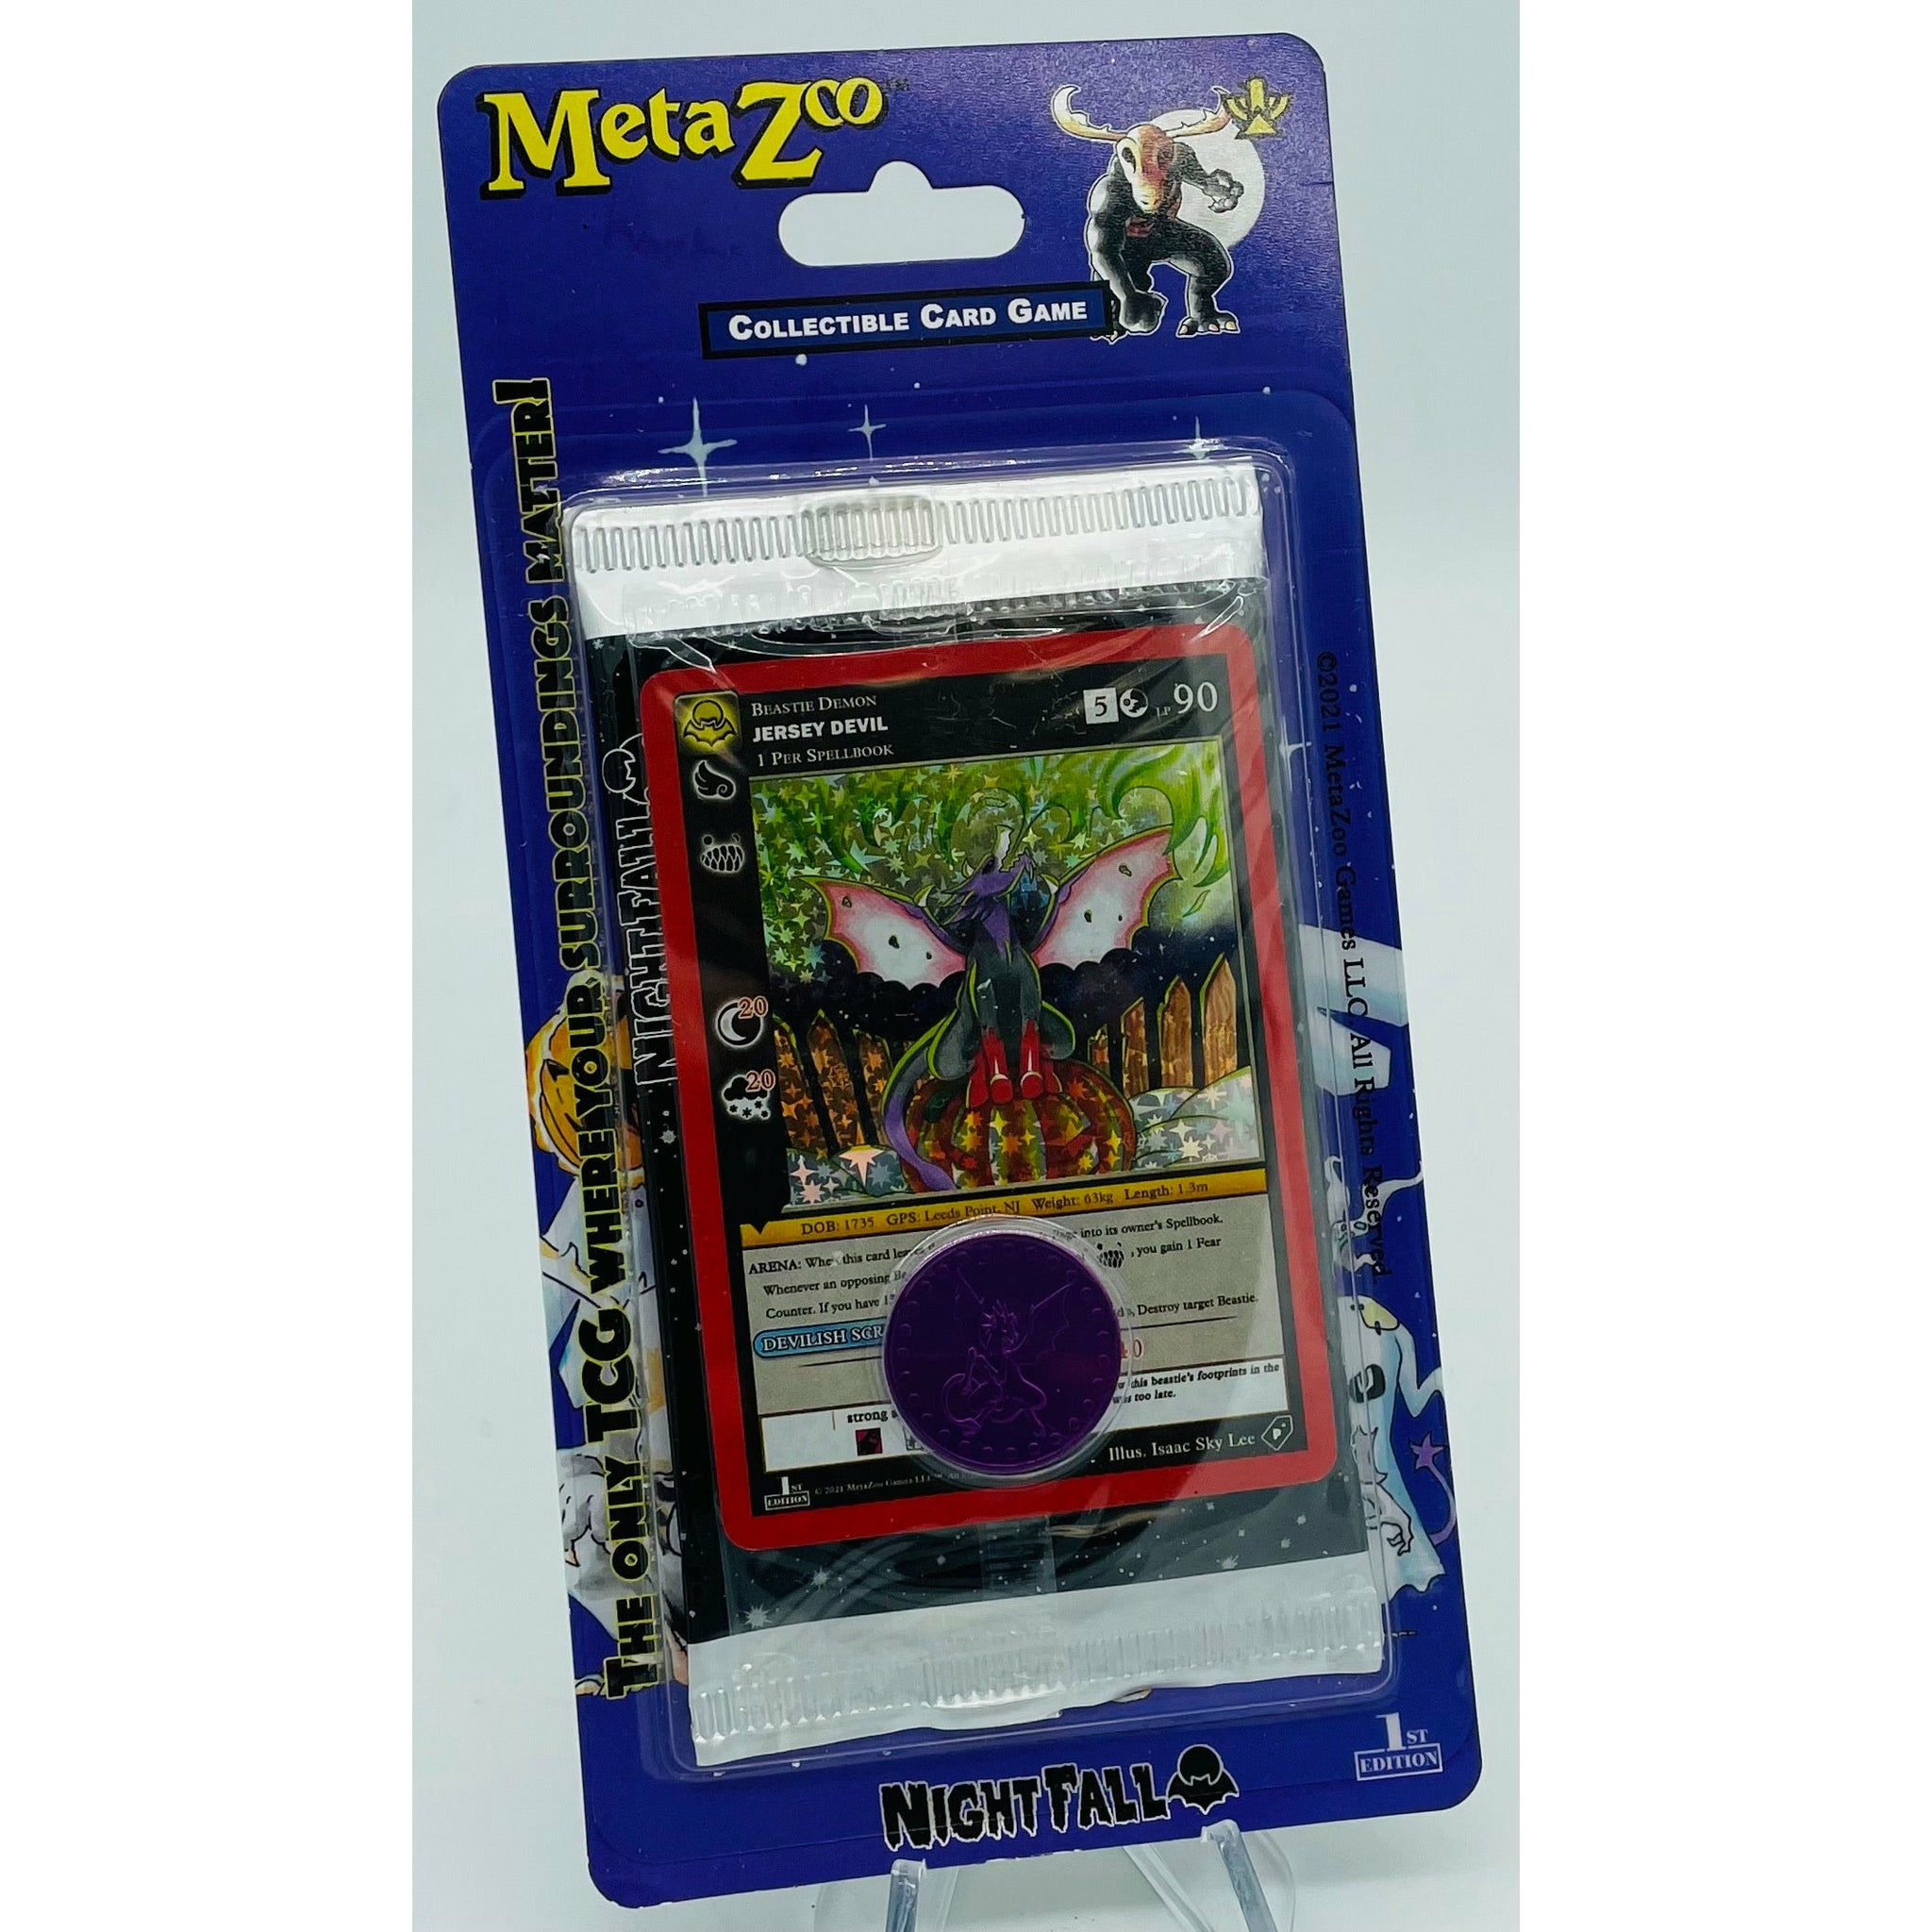 MetaZoo Cryptid Nation Nightfall 1st Edition Blister Booster Pack Factory Sealed